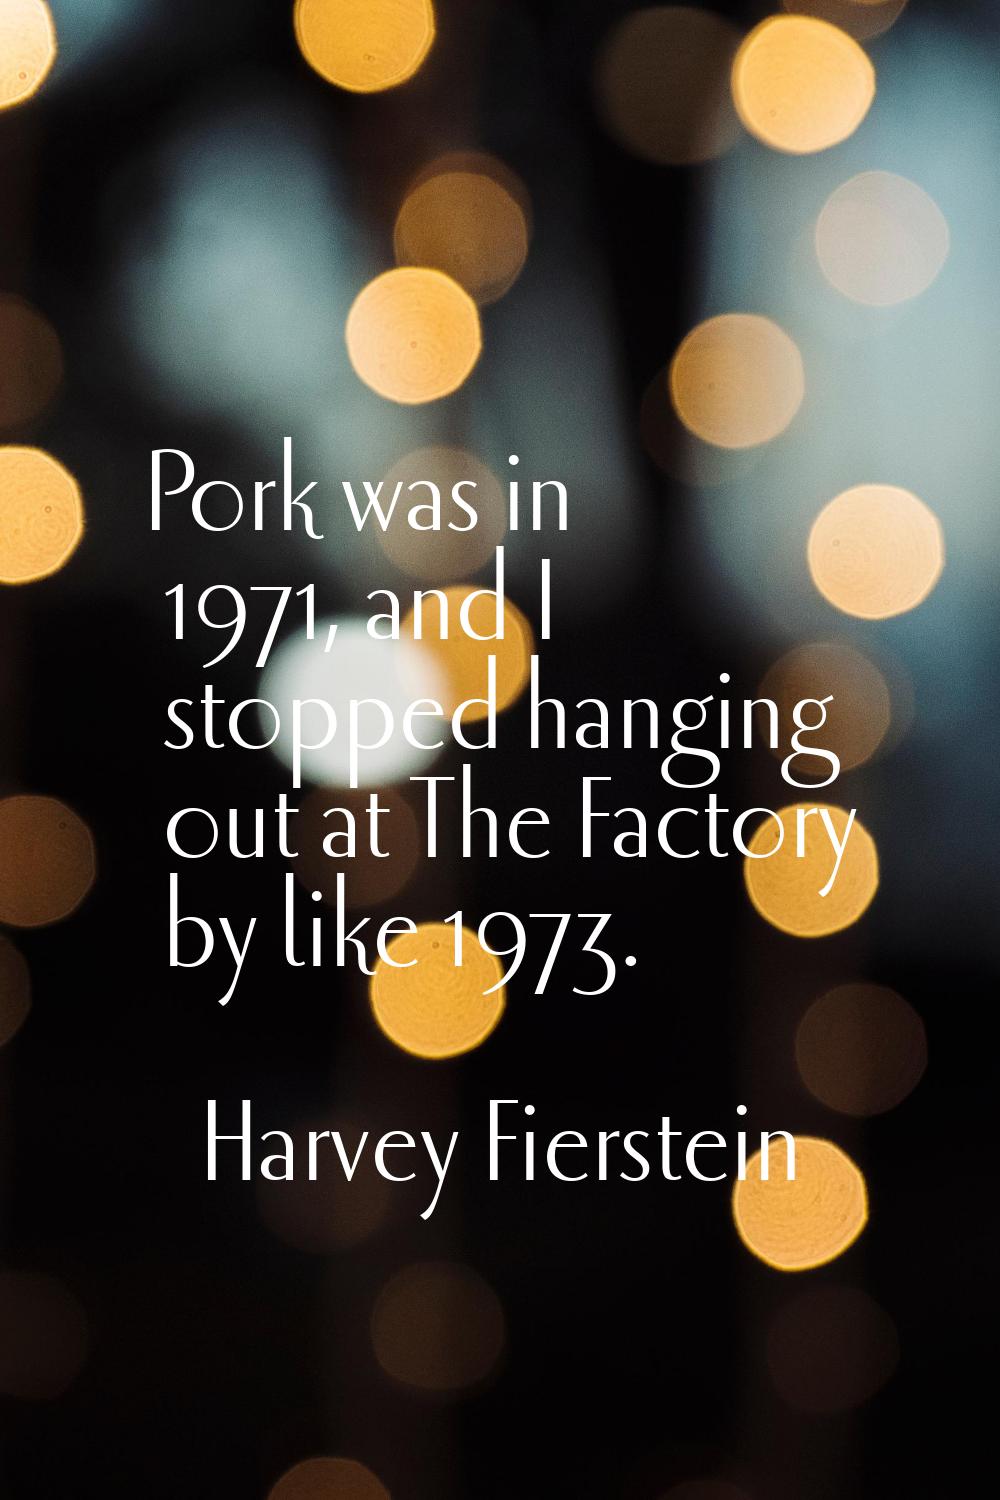 Pork was in 1971, and I stopped hanging out at The Factory by like 1973.